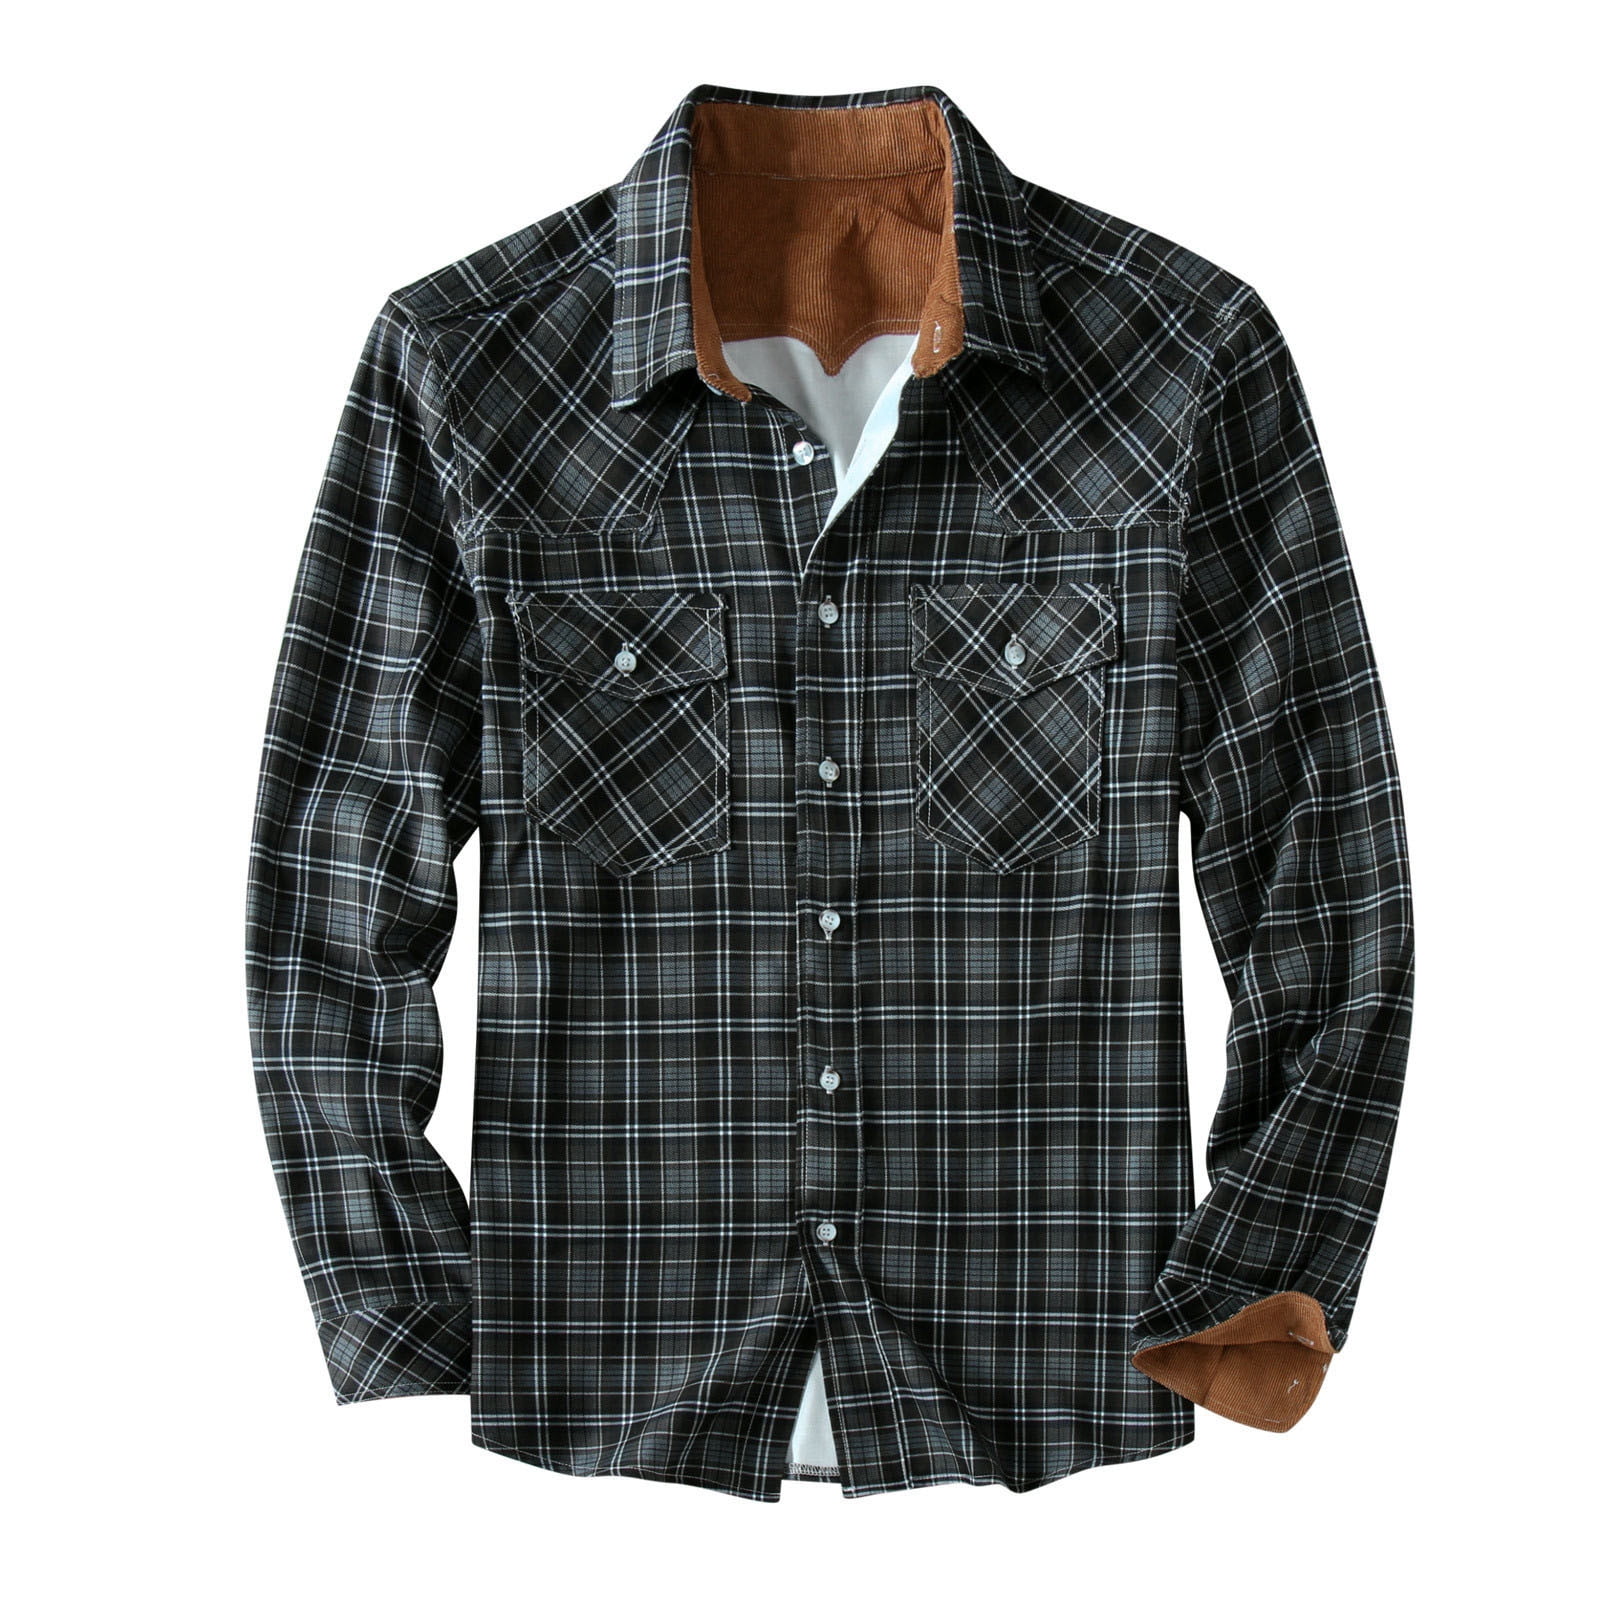 YYDGH Flannel Shirt for Men Long Sleeve Casual Button-Down Regular Fit  Plaid Shirts Casual Slim Fit Warm Lapel Jackets Black 5XL 